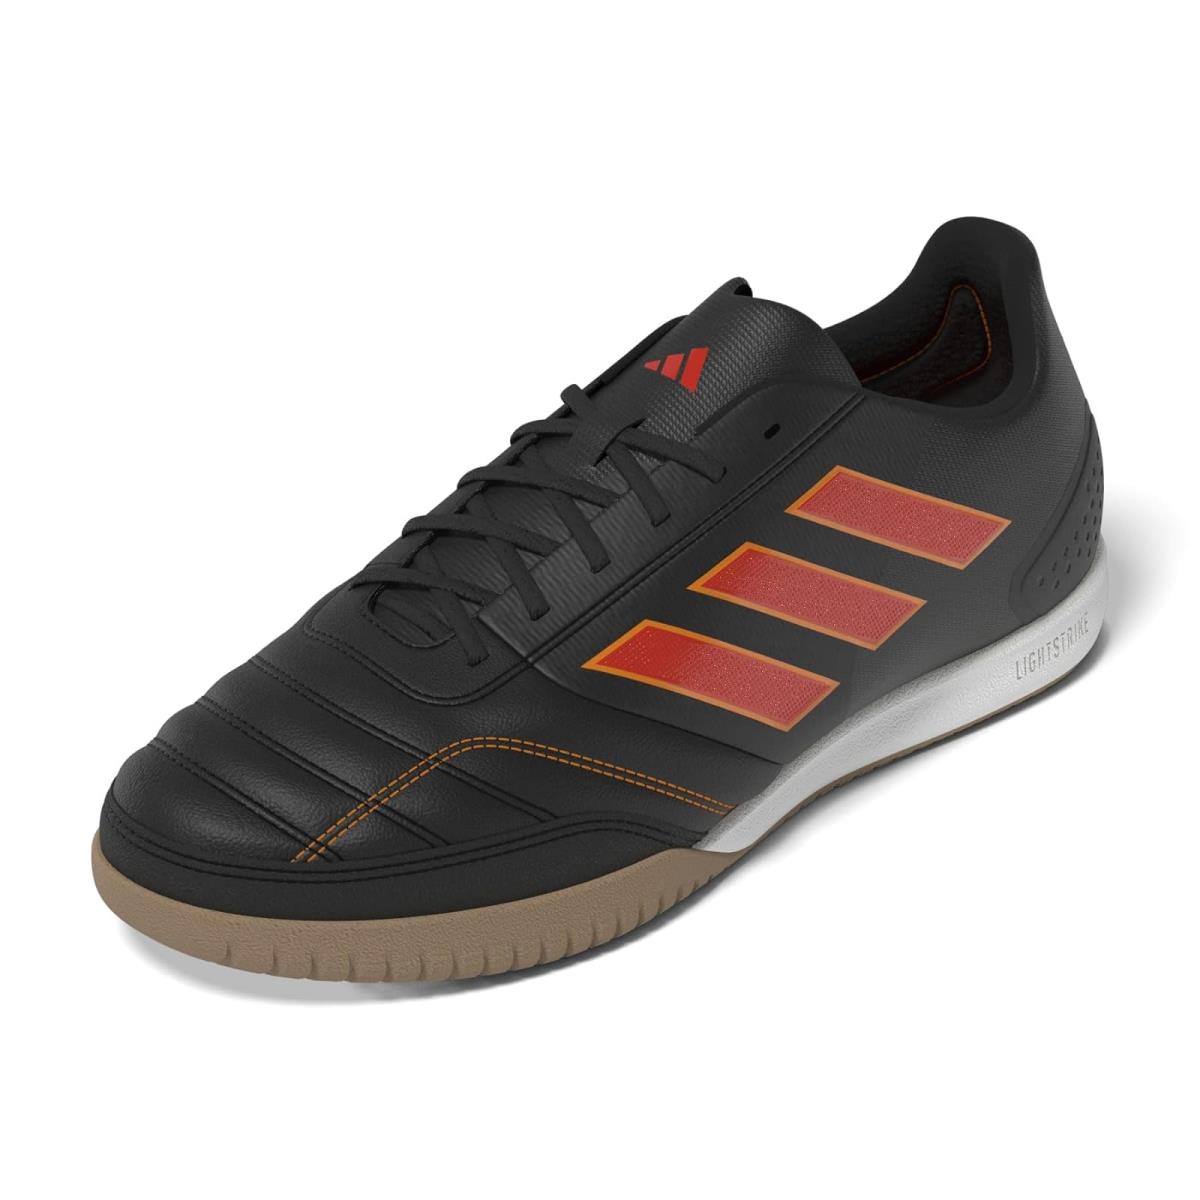 Unisex Sneakers Athletic Shoes Adidas Top Sala Competition Core Black/Bold Orange/Bold Gold